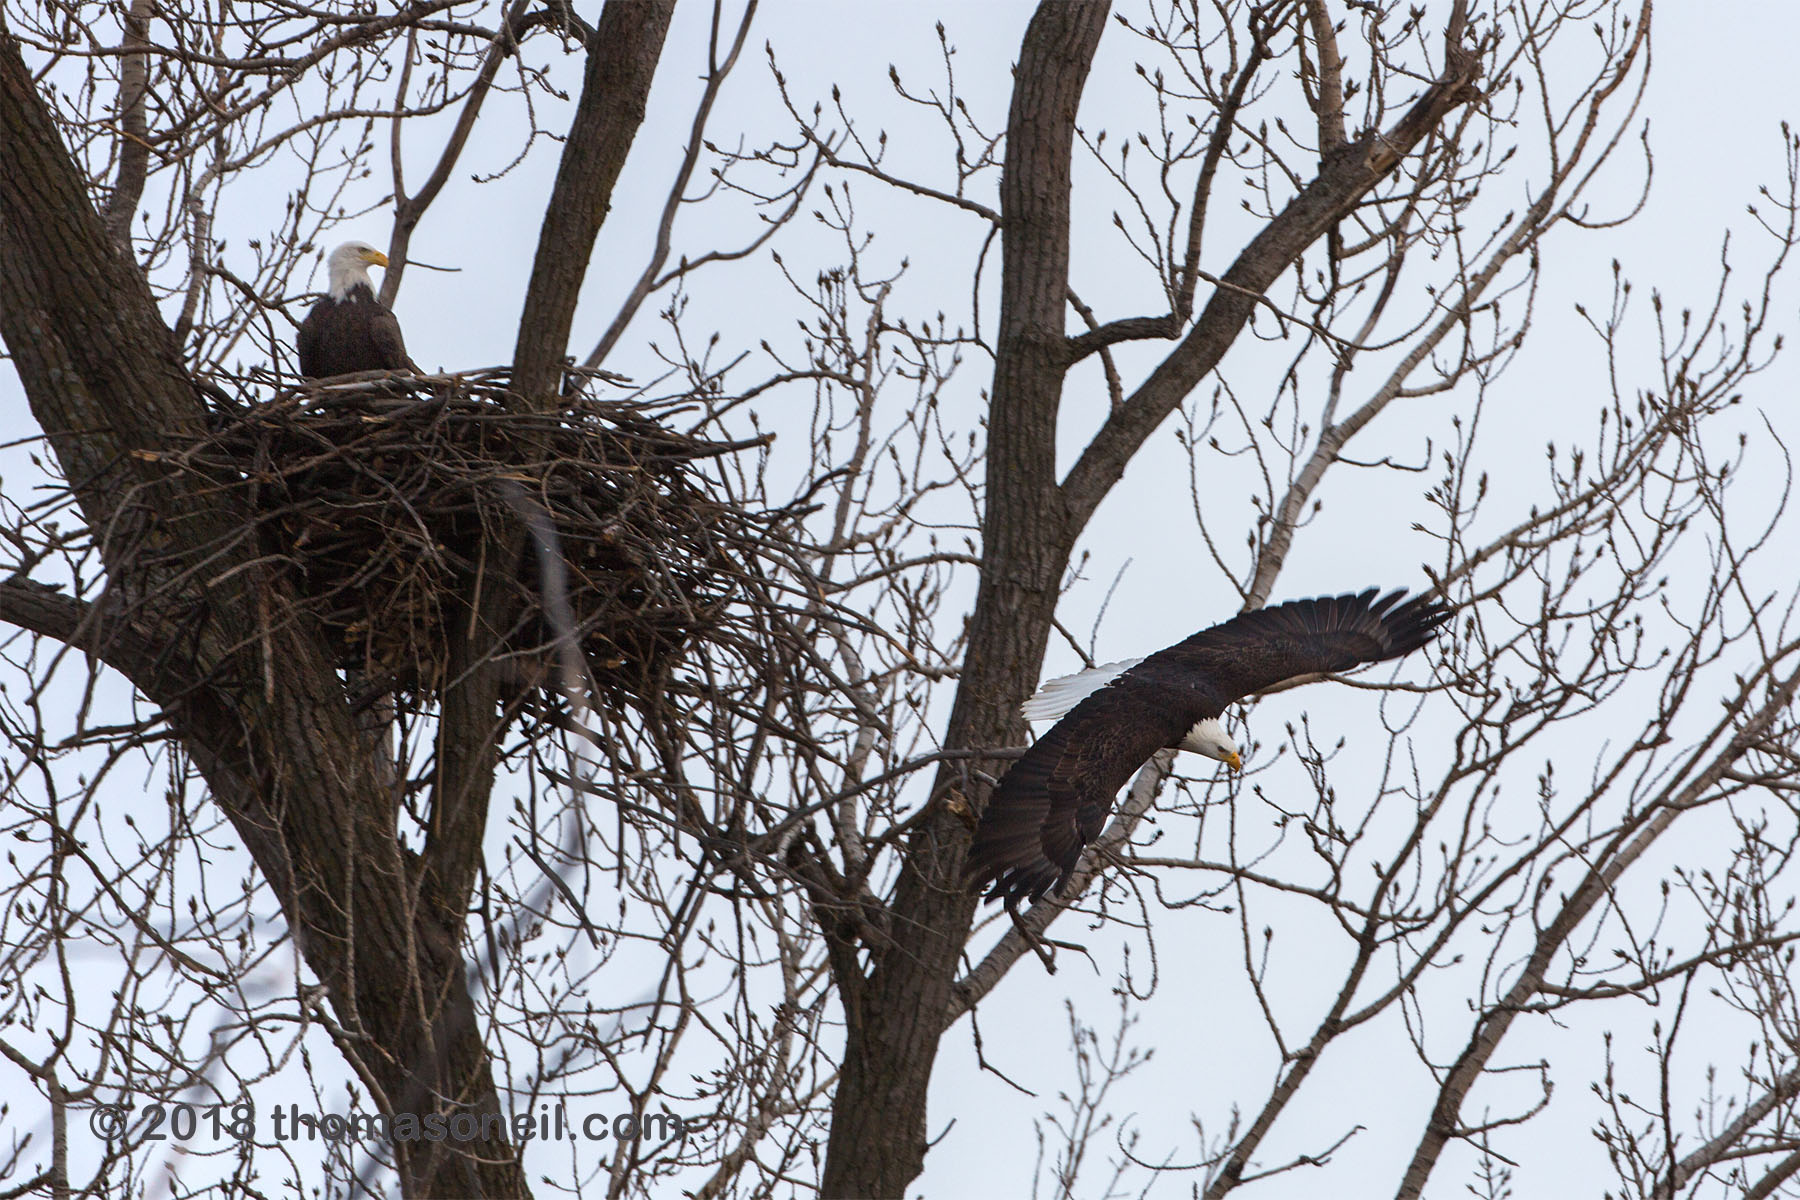 Bald eagle leaving the nest, Loess Bluffs National Wildlife Refuge, Missouri.  Click for next photo.